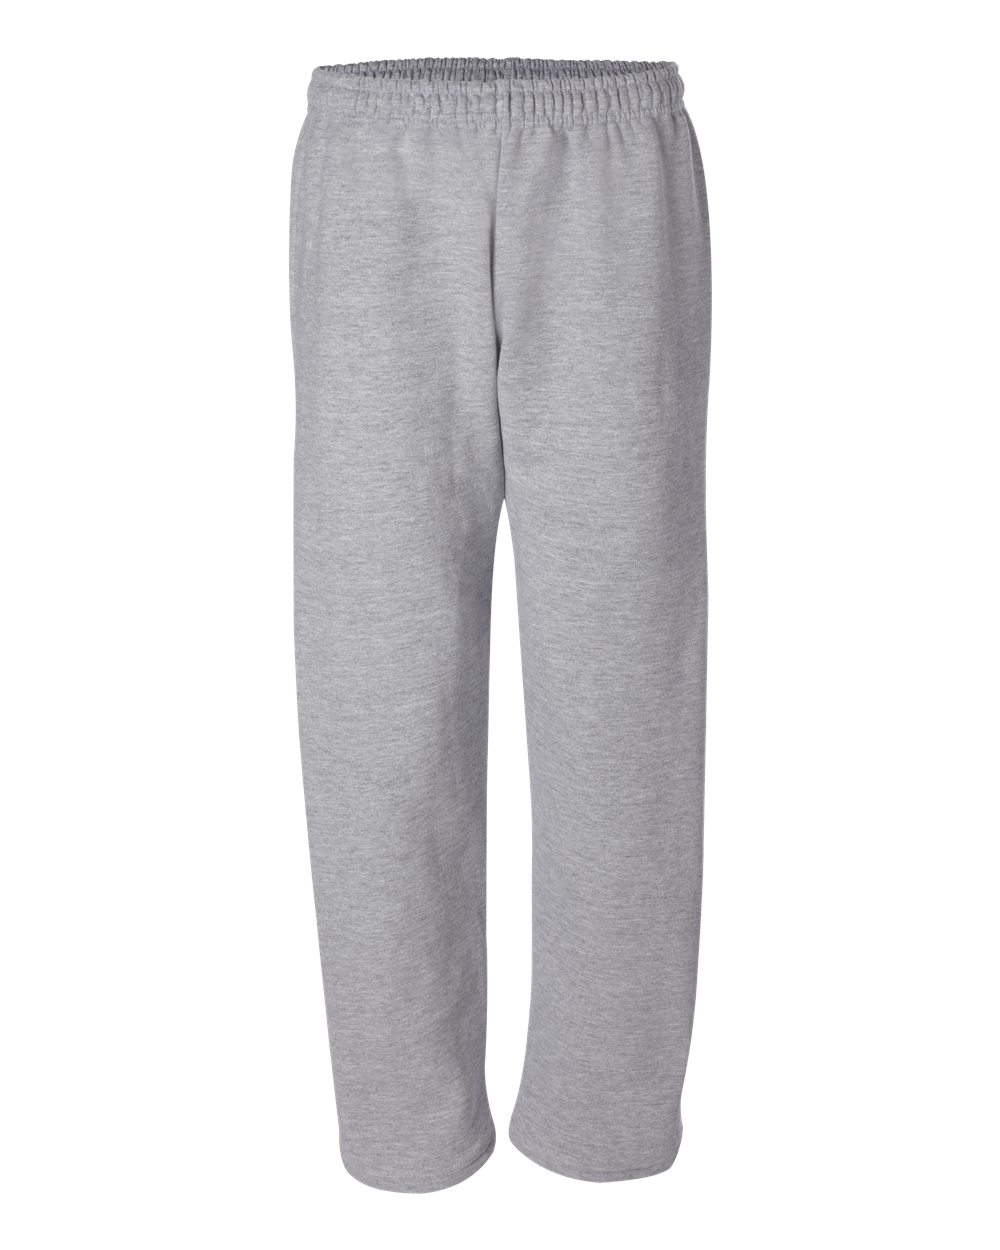 click to view Sport Grey